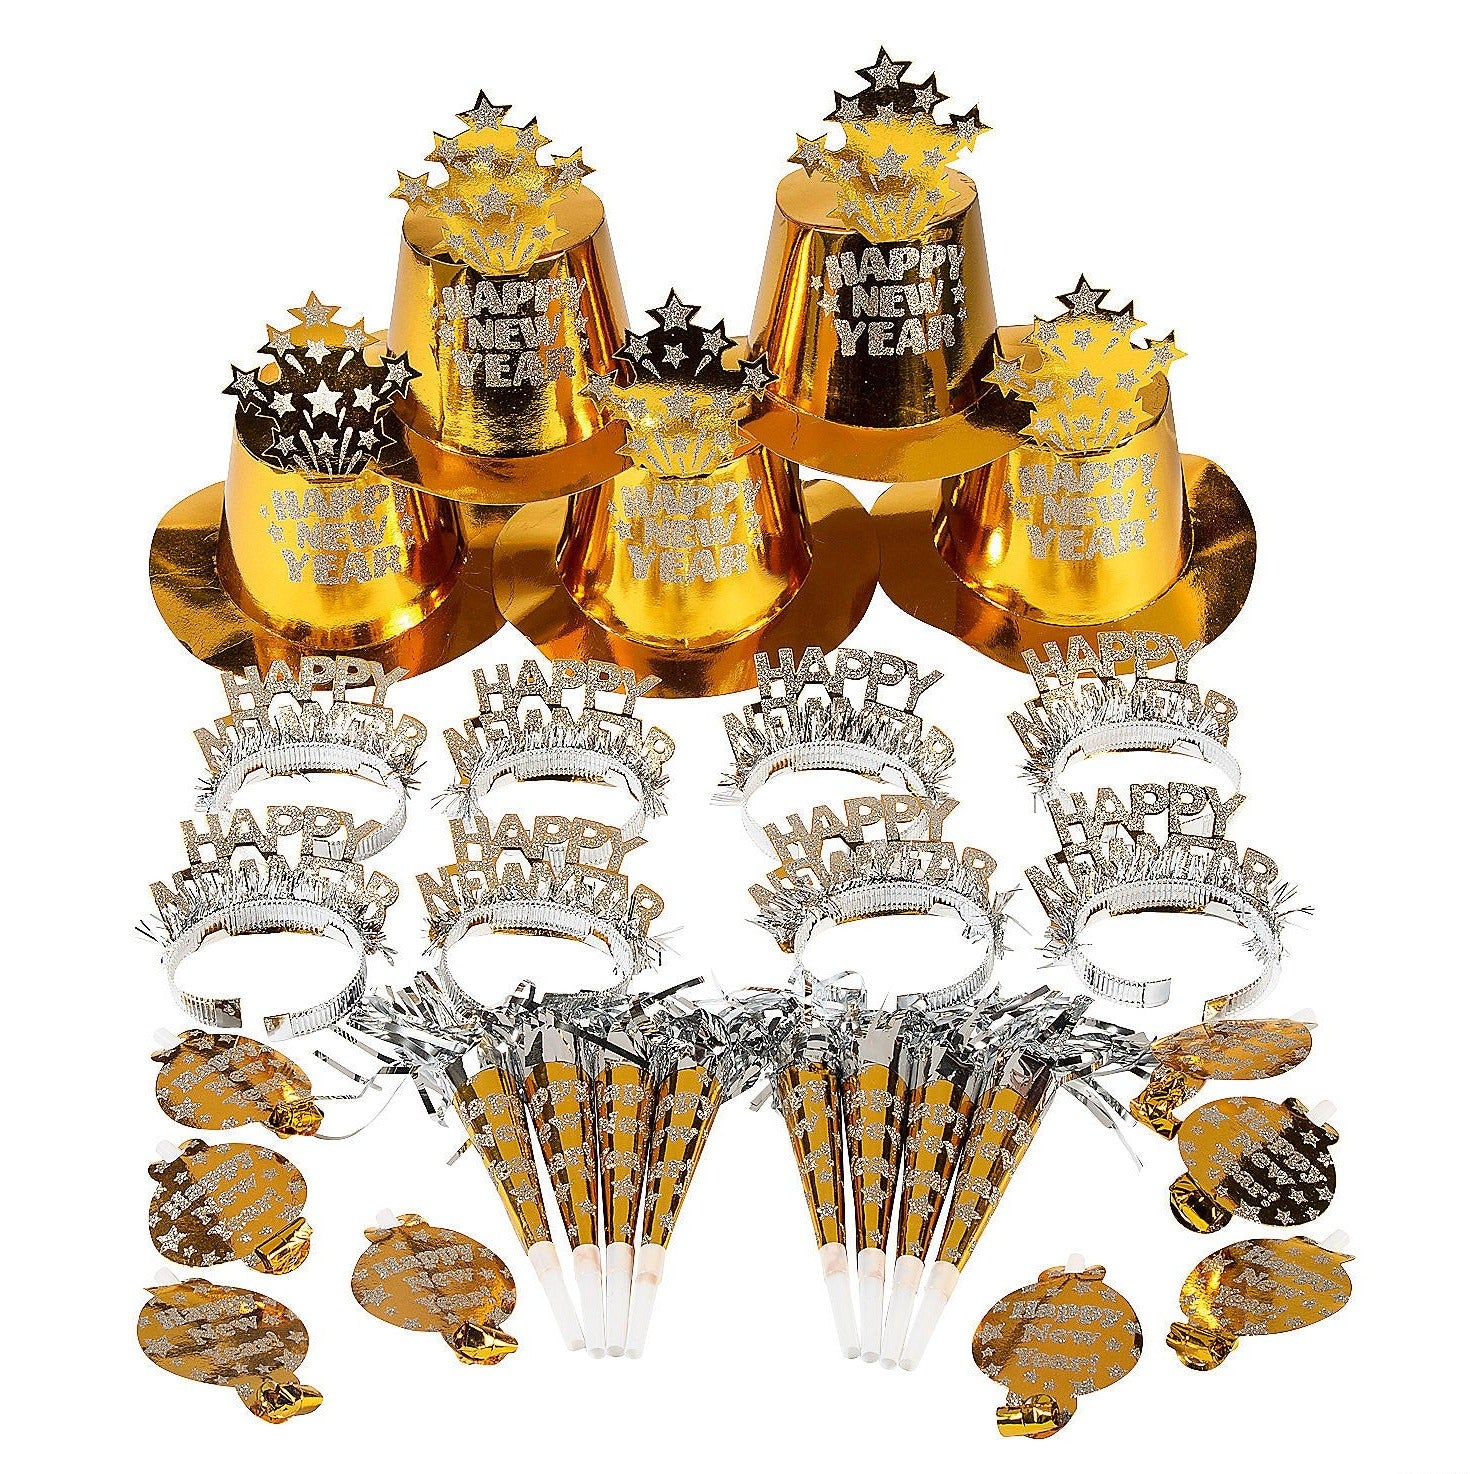 New Year's Eve Glitzy Gold Party Kit for 25 Guests